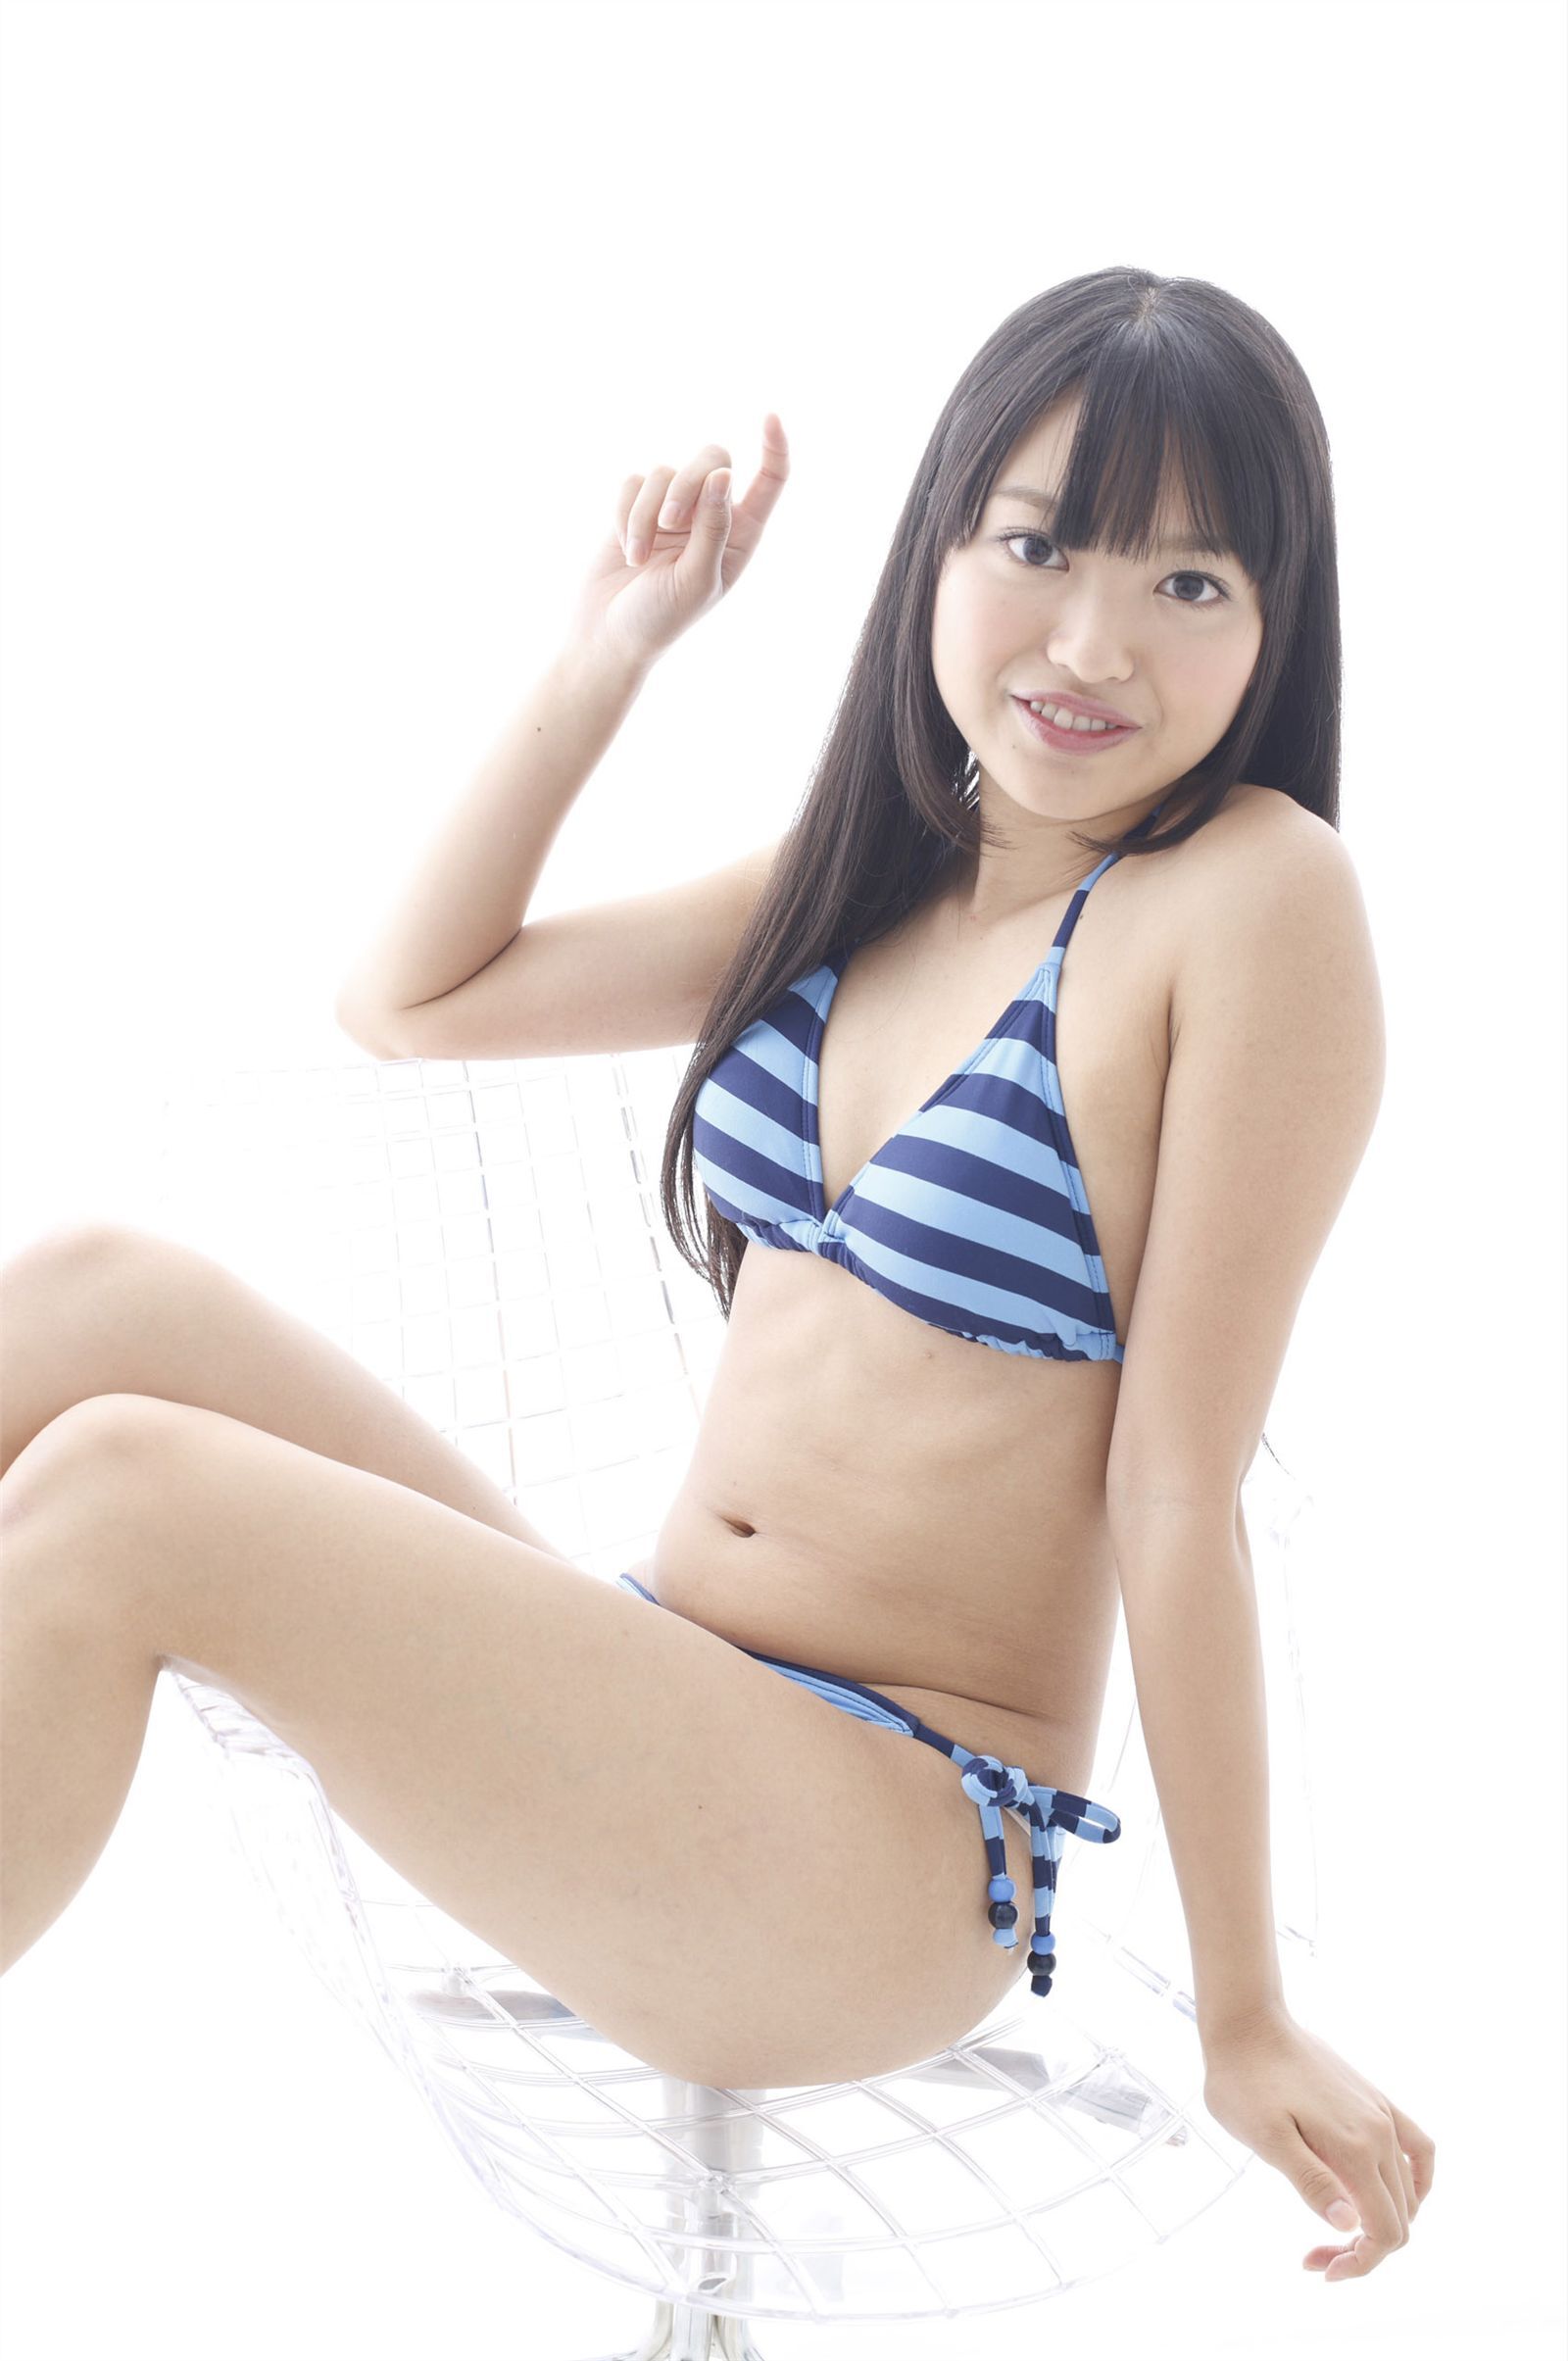 [WPB net] Japanese beauty picture 3 2013.01.30 No.135